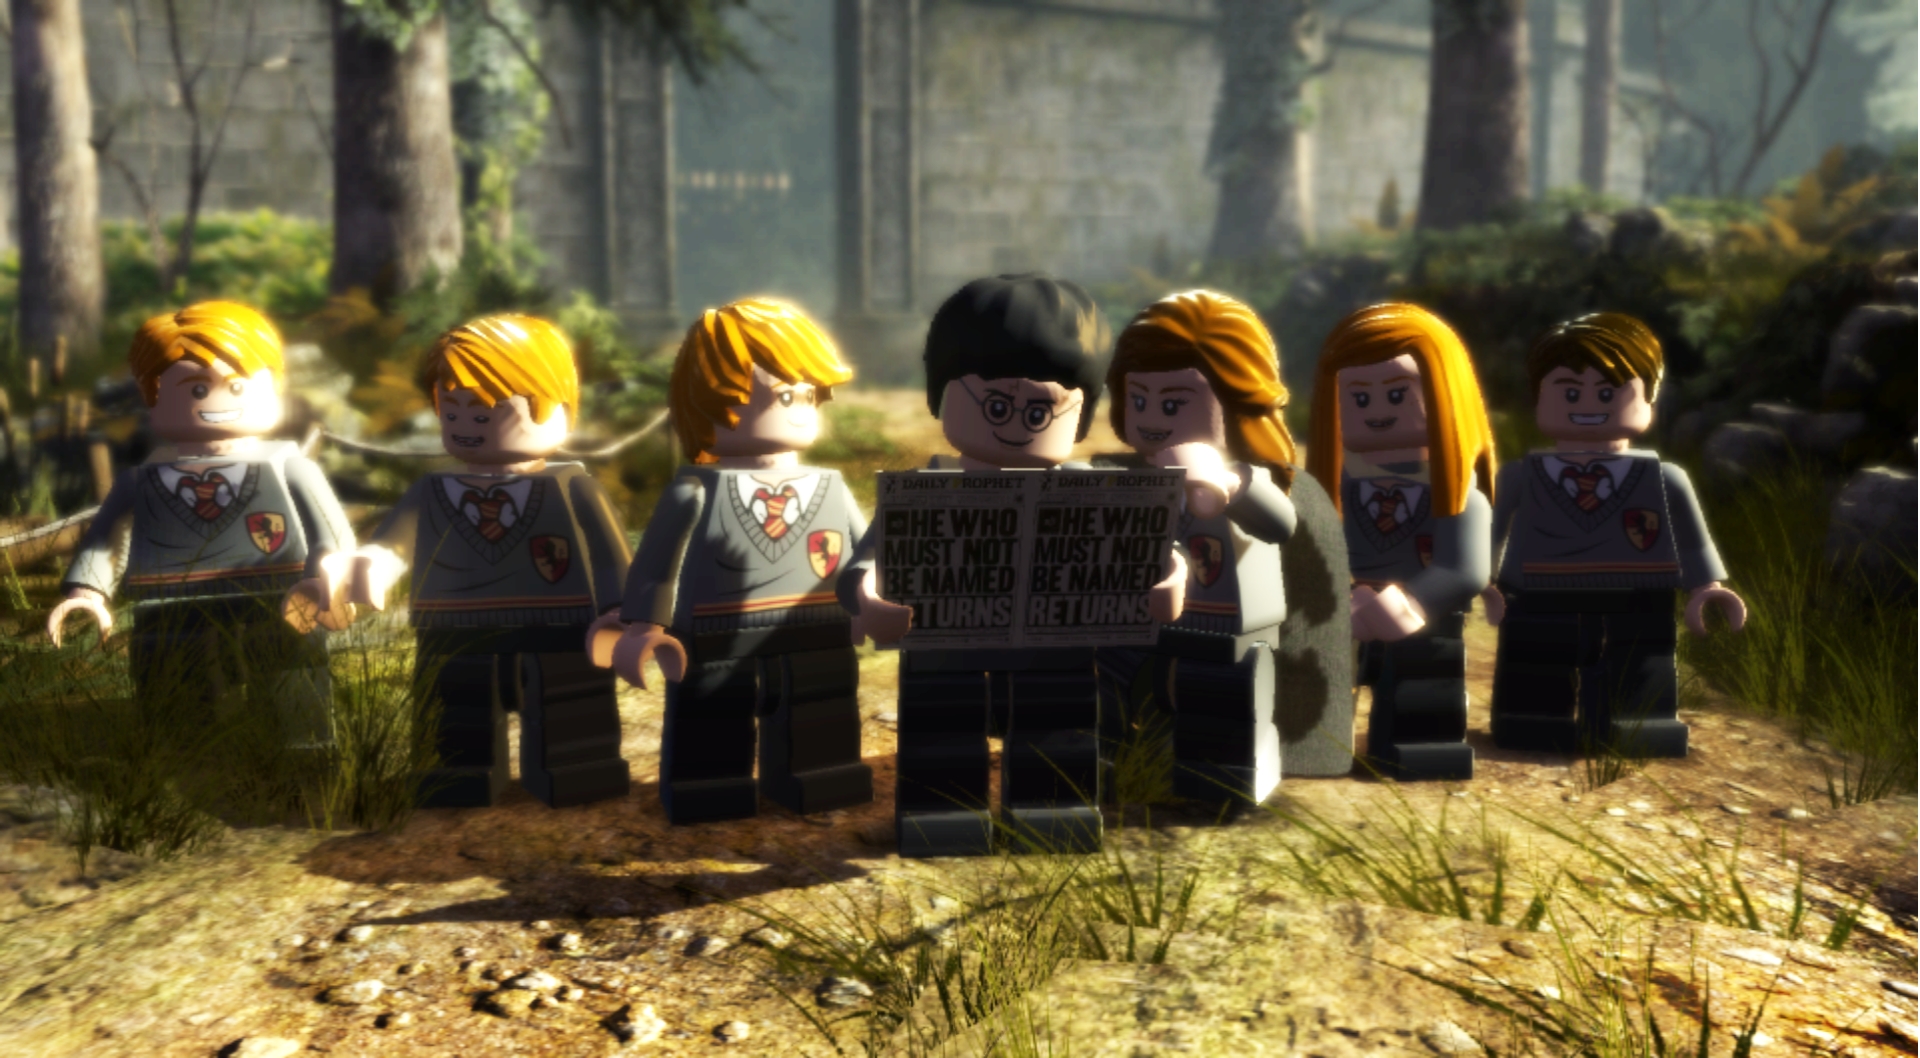 LEGO Harry Potter: Years 5-7 review